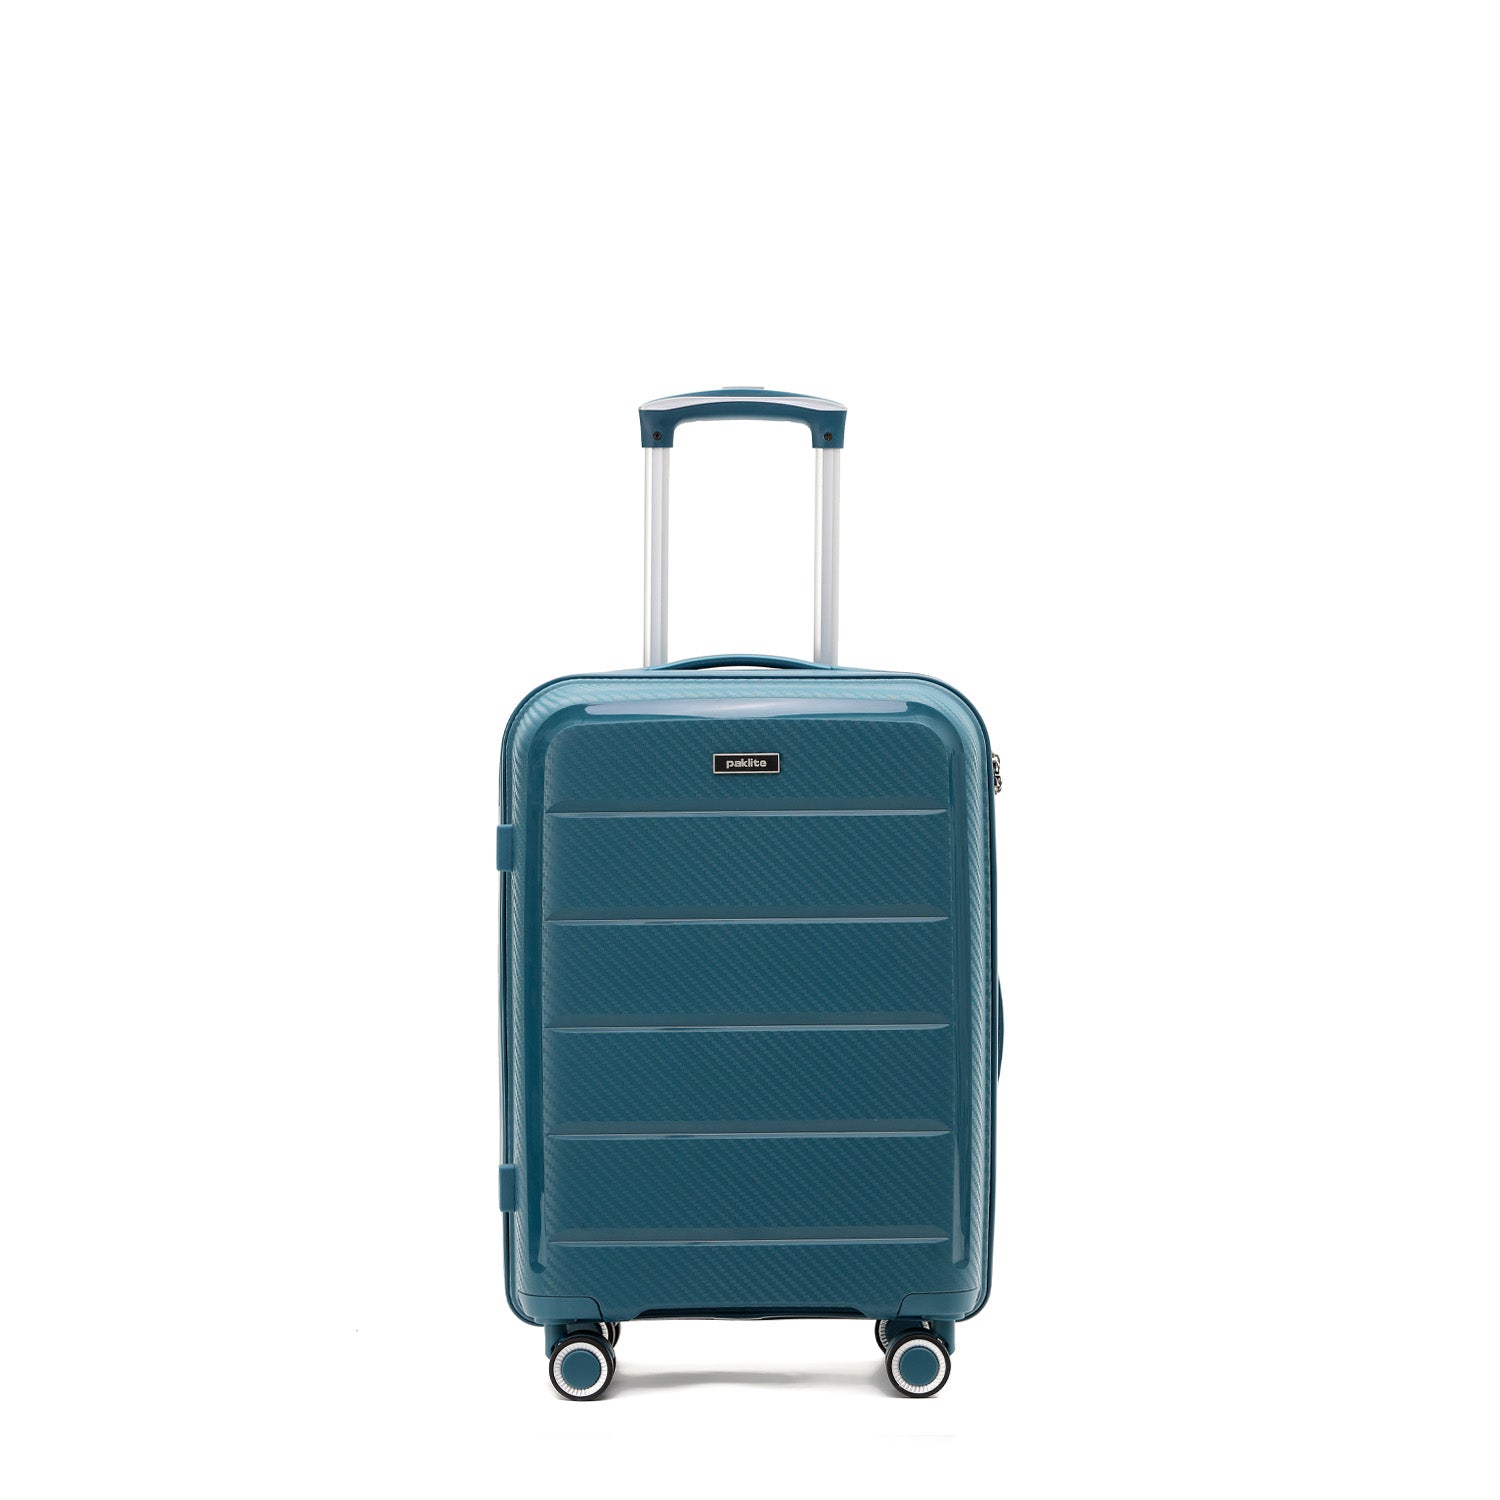 Paklite - PA7350 small spinner suitcase - Blue